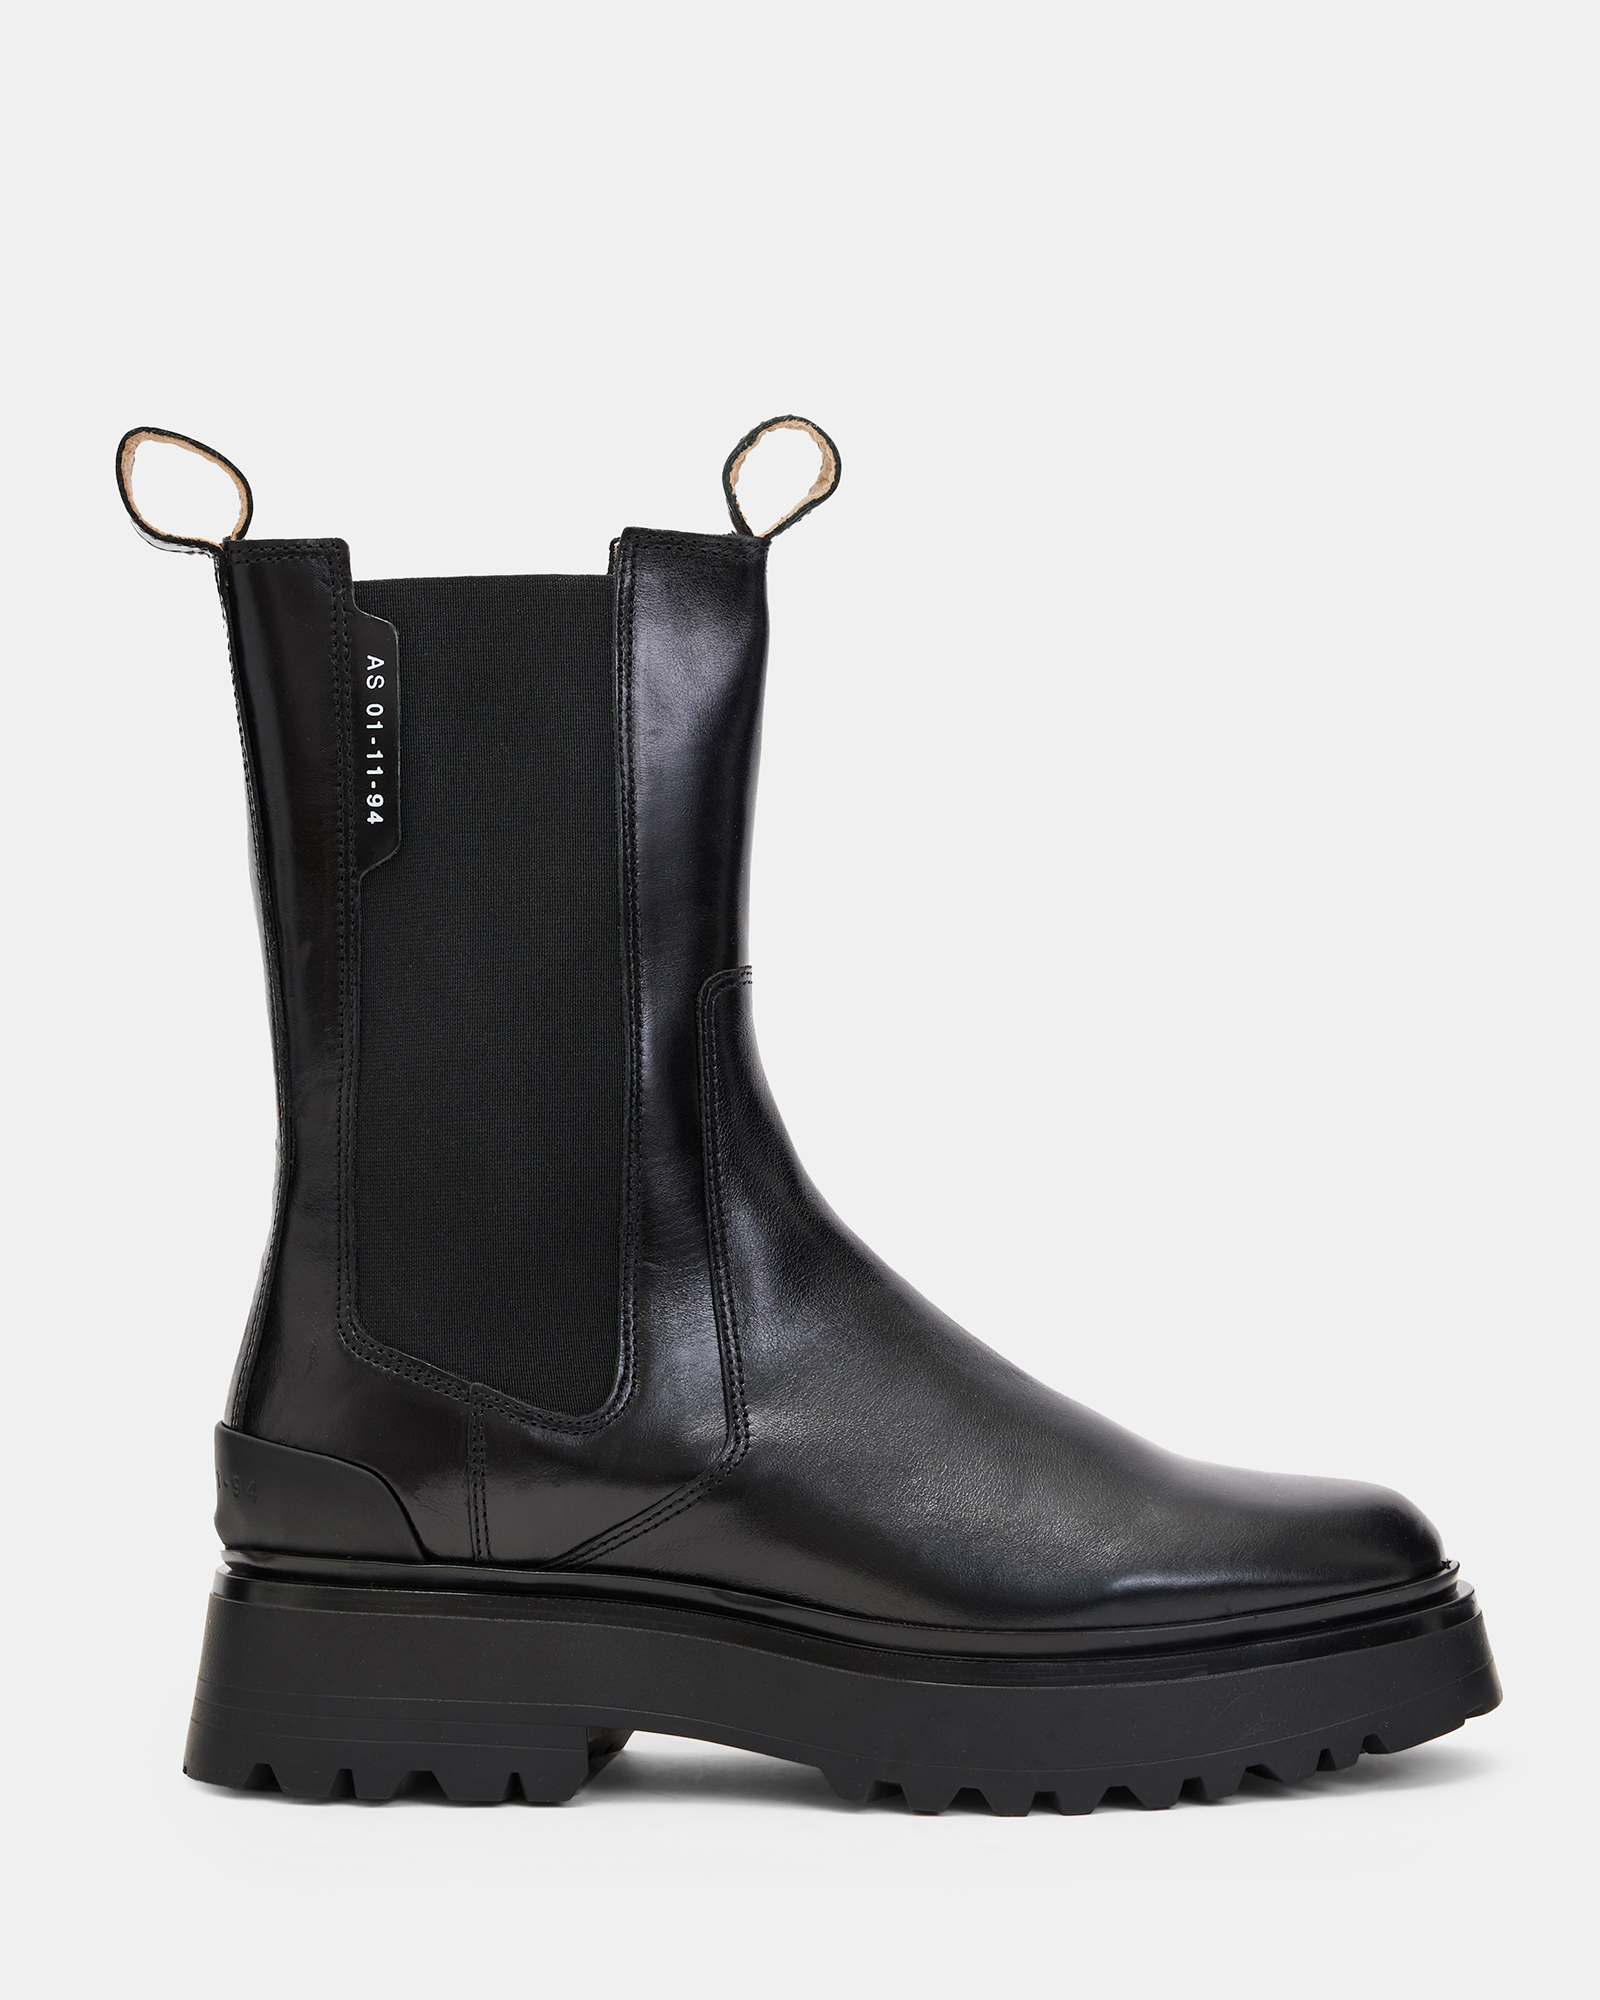 AllSaints Amber Leather Boots